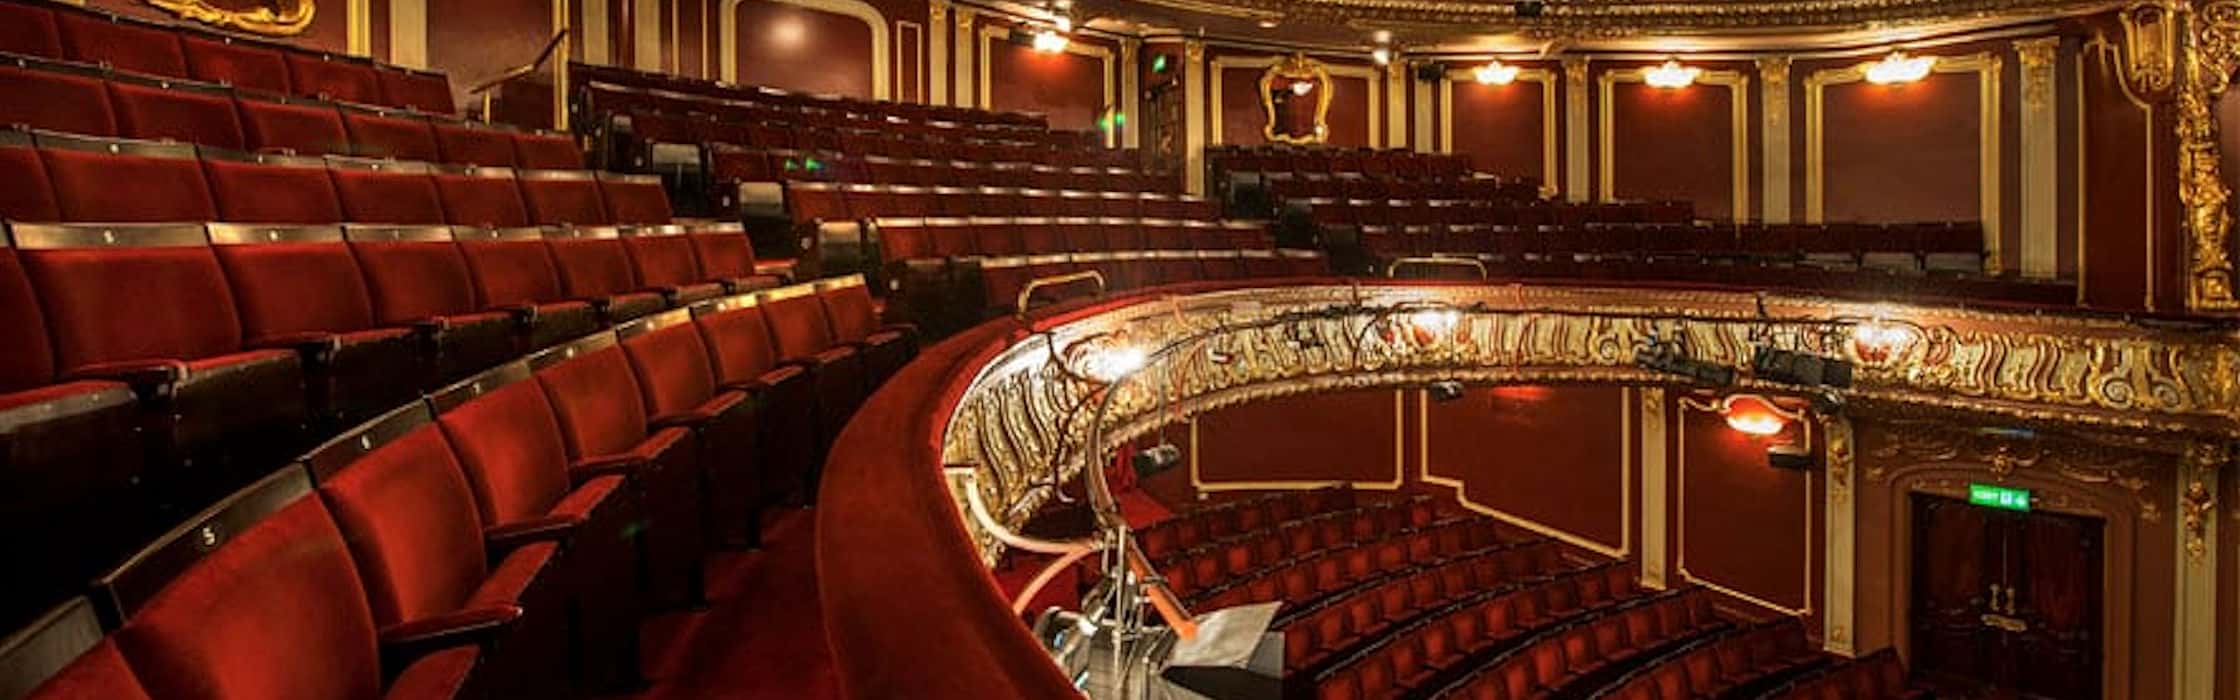 What's On at The Apollo Theatre, London